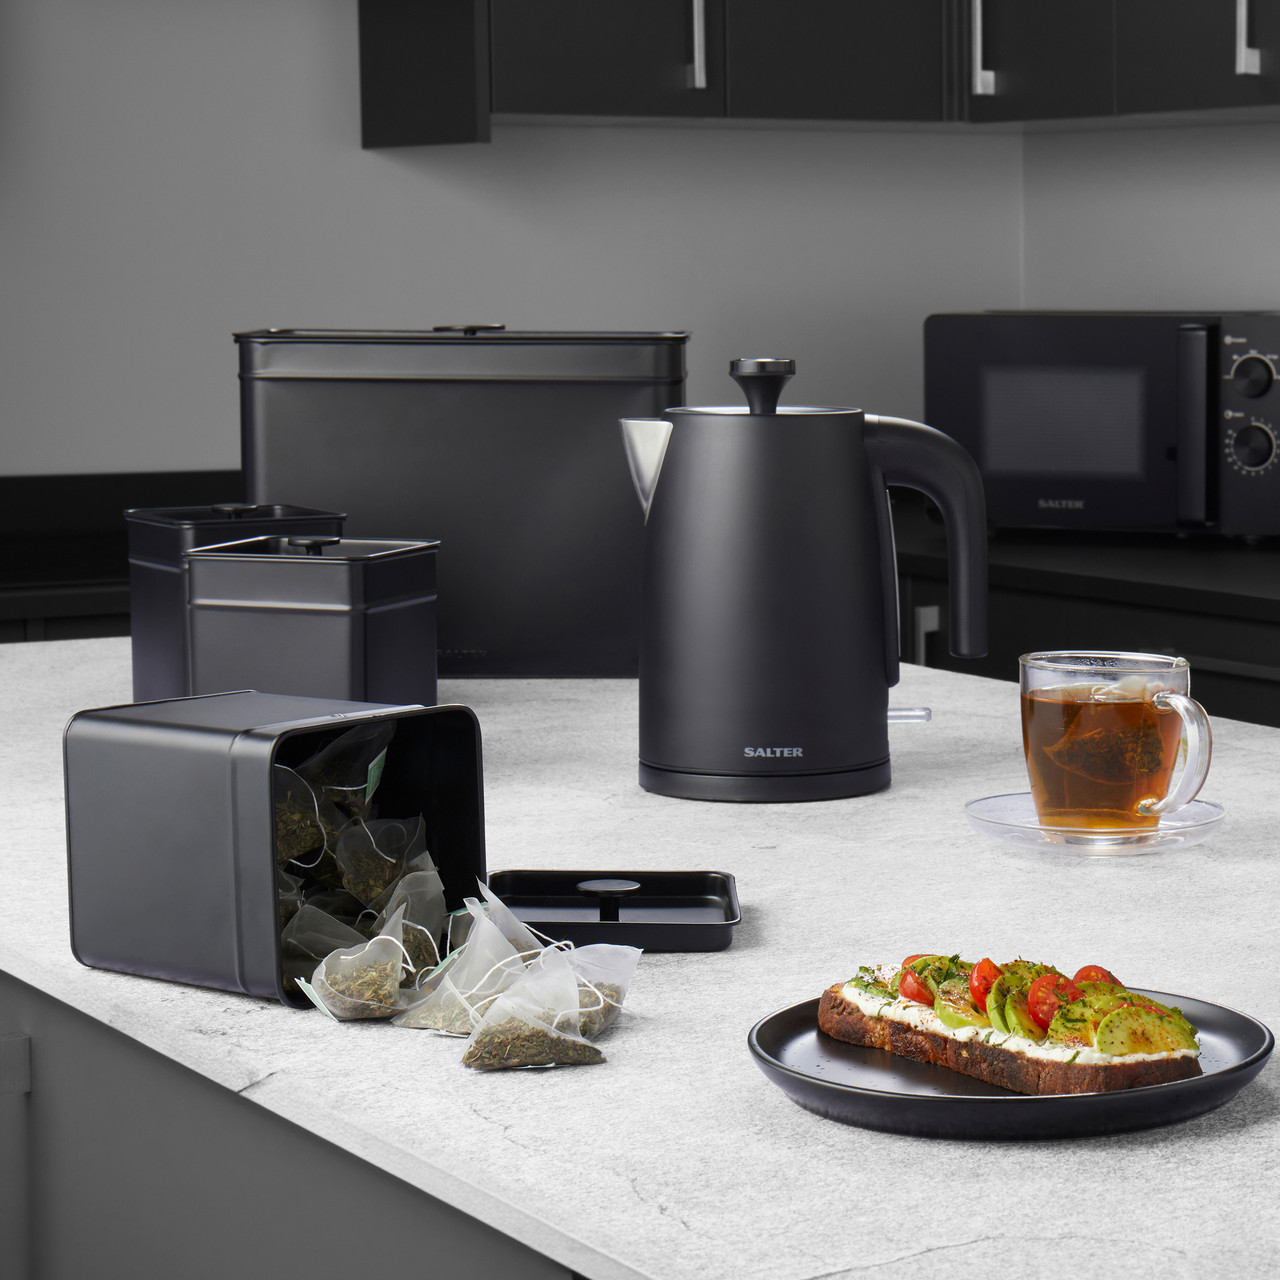 Products from the Salter Kuro Range on a kitchen worktop